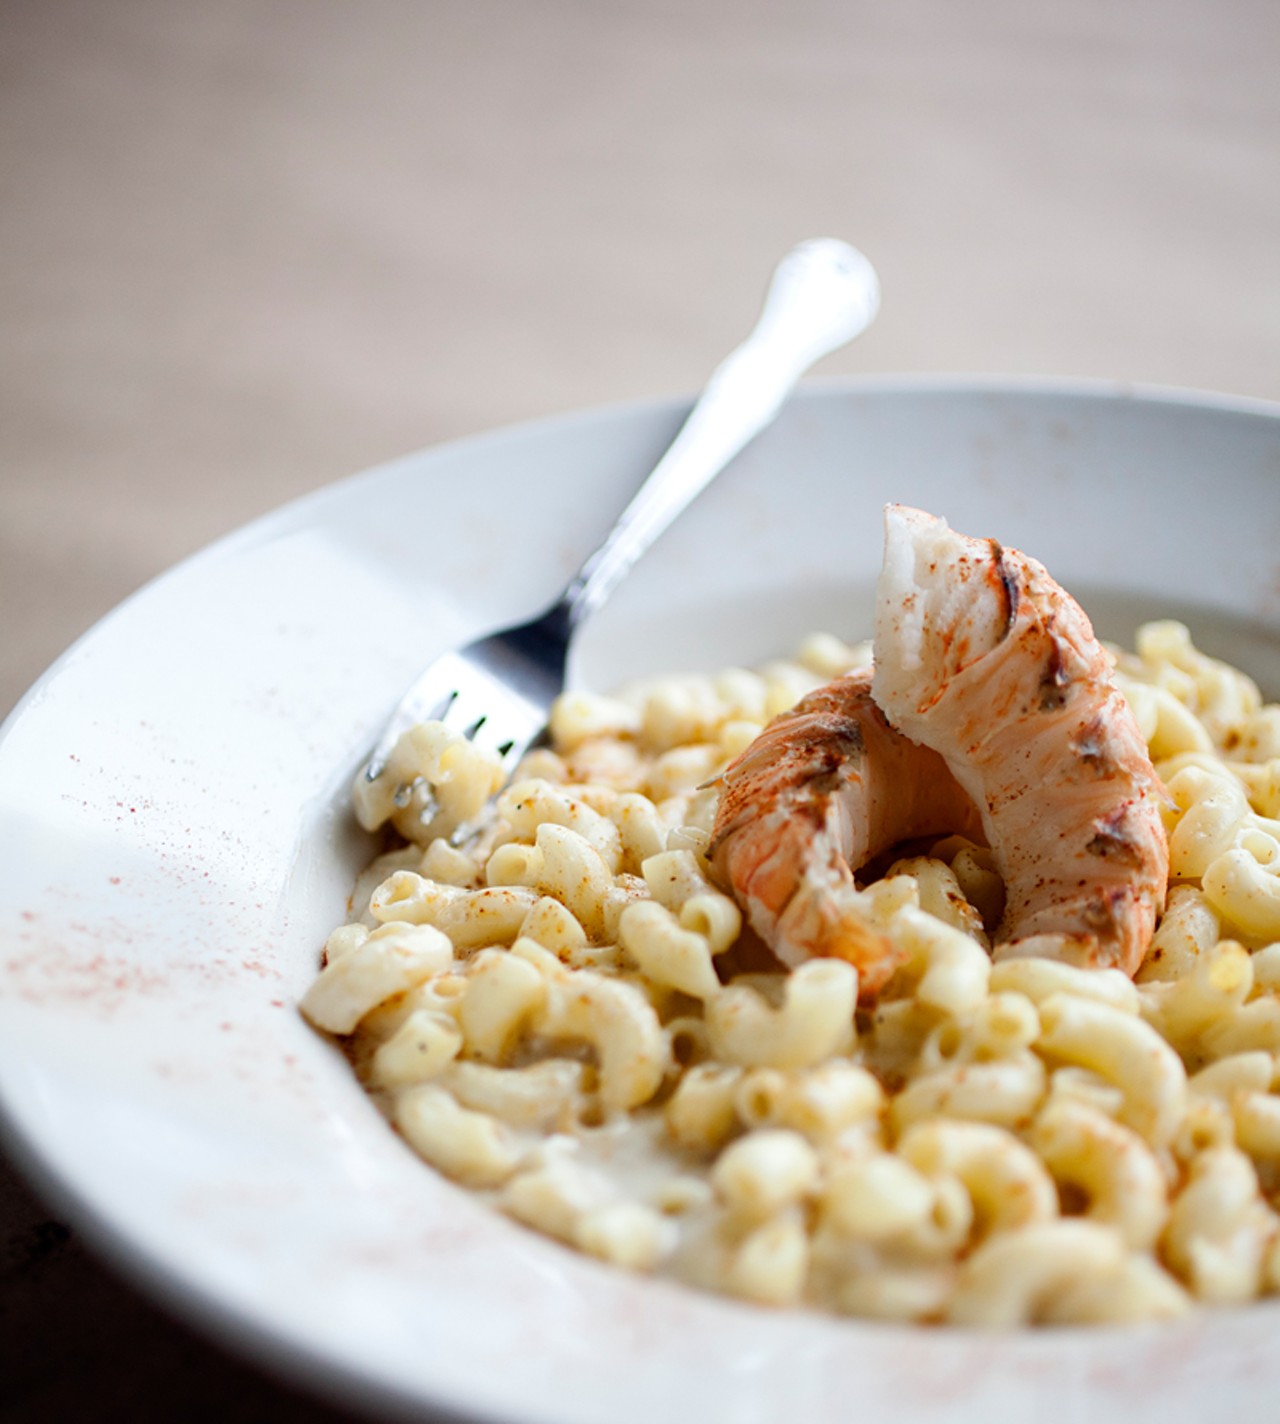 Mac and cheese is made with tube pasta, gruyere cheese sauce and a five-ounce lobster tail.